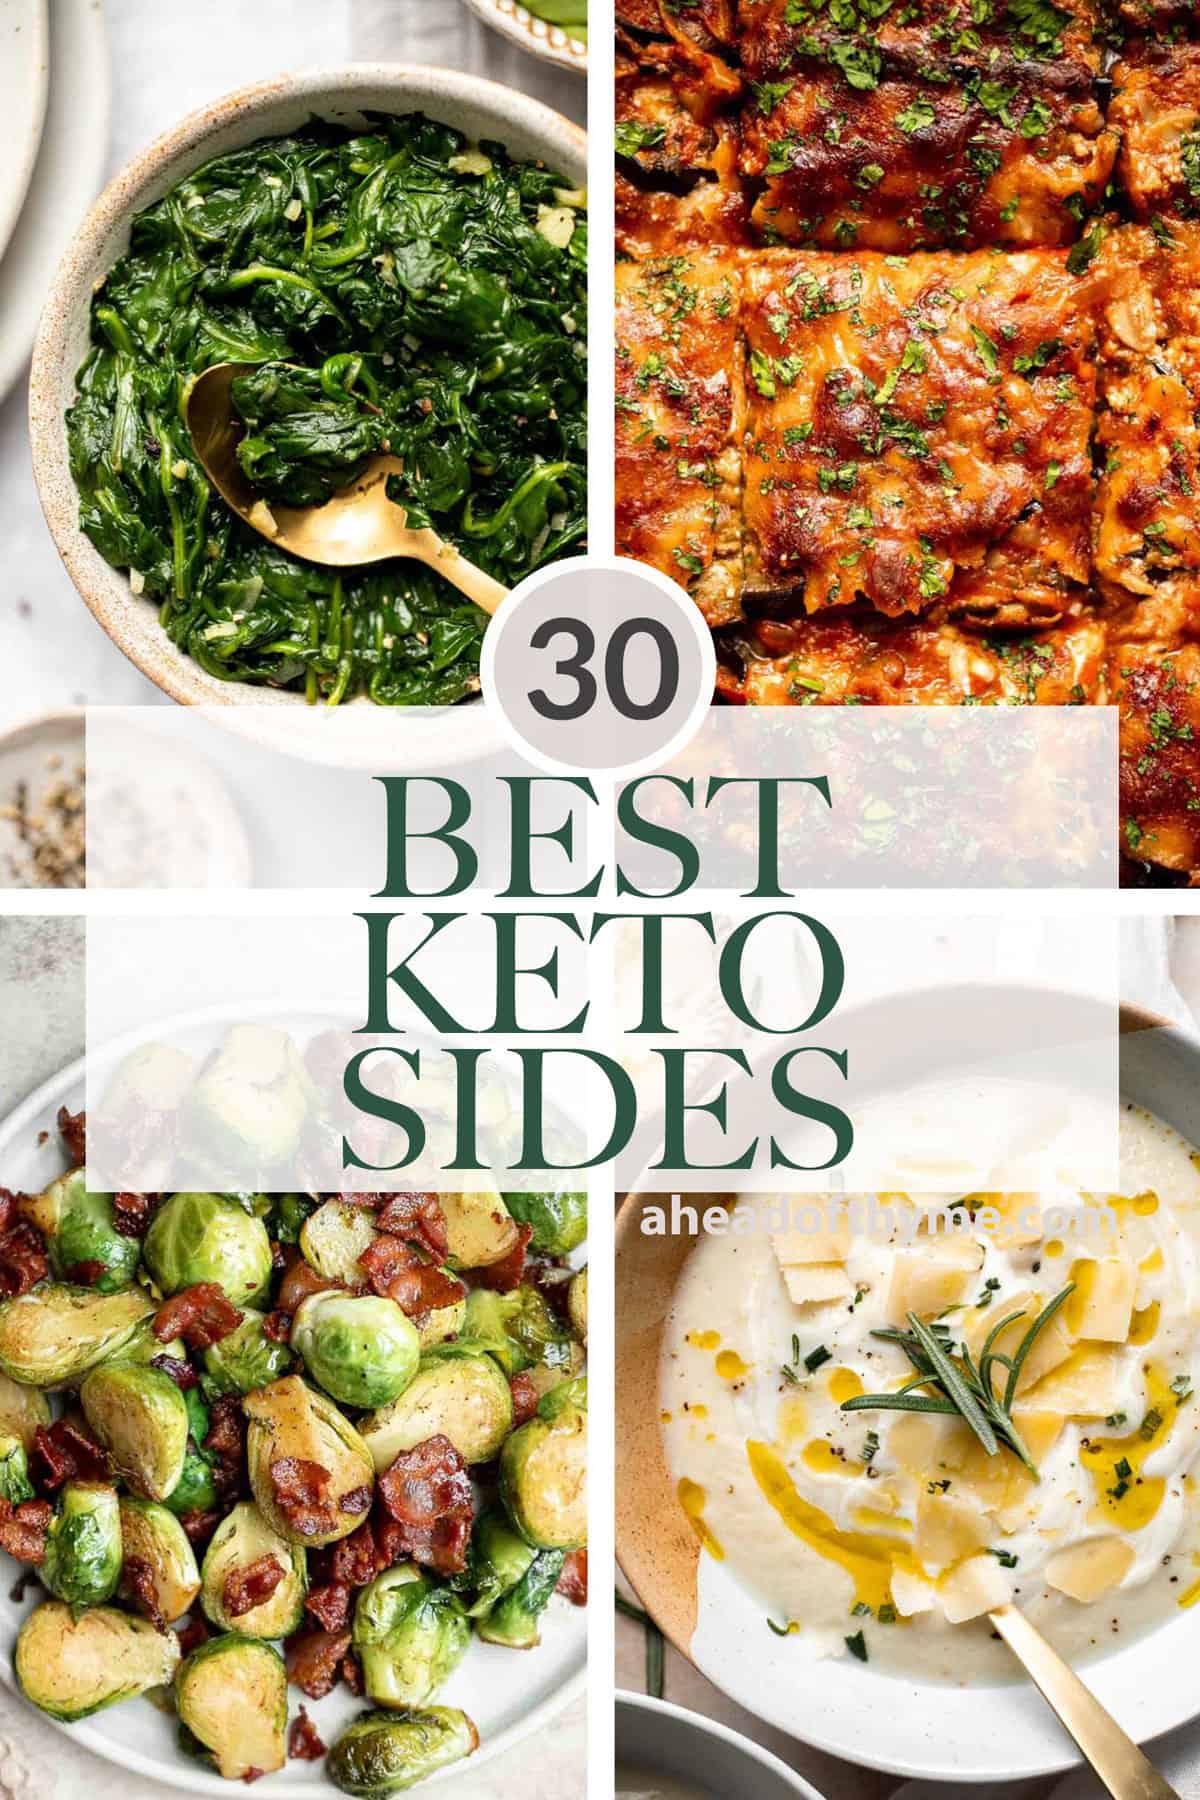 Over 30 Best Keto Side Dishes featuring a collection of low-carb sides including fresh salads, roasted veggies, creamy mashed vegetables, soups, and more. | aheadofthyme.com